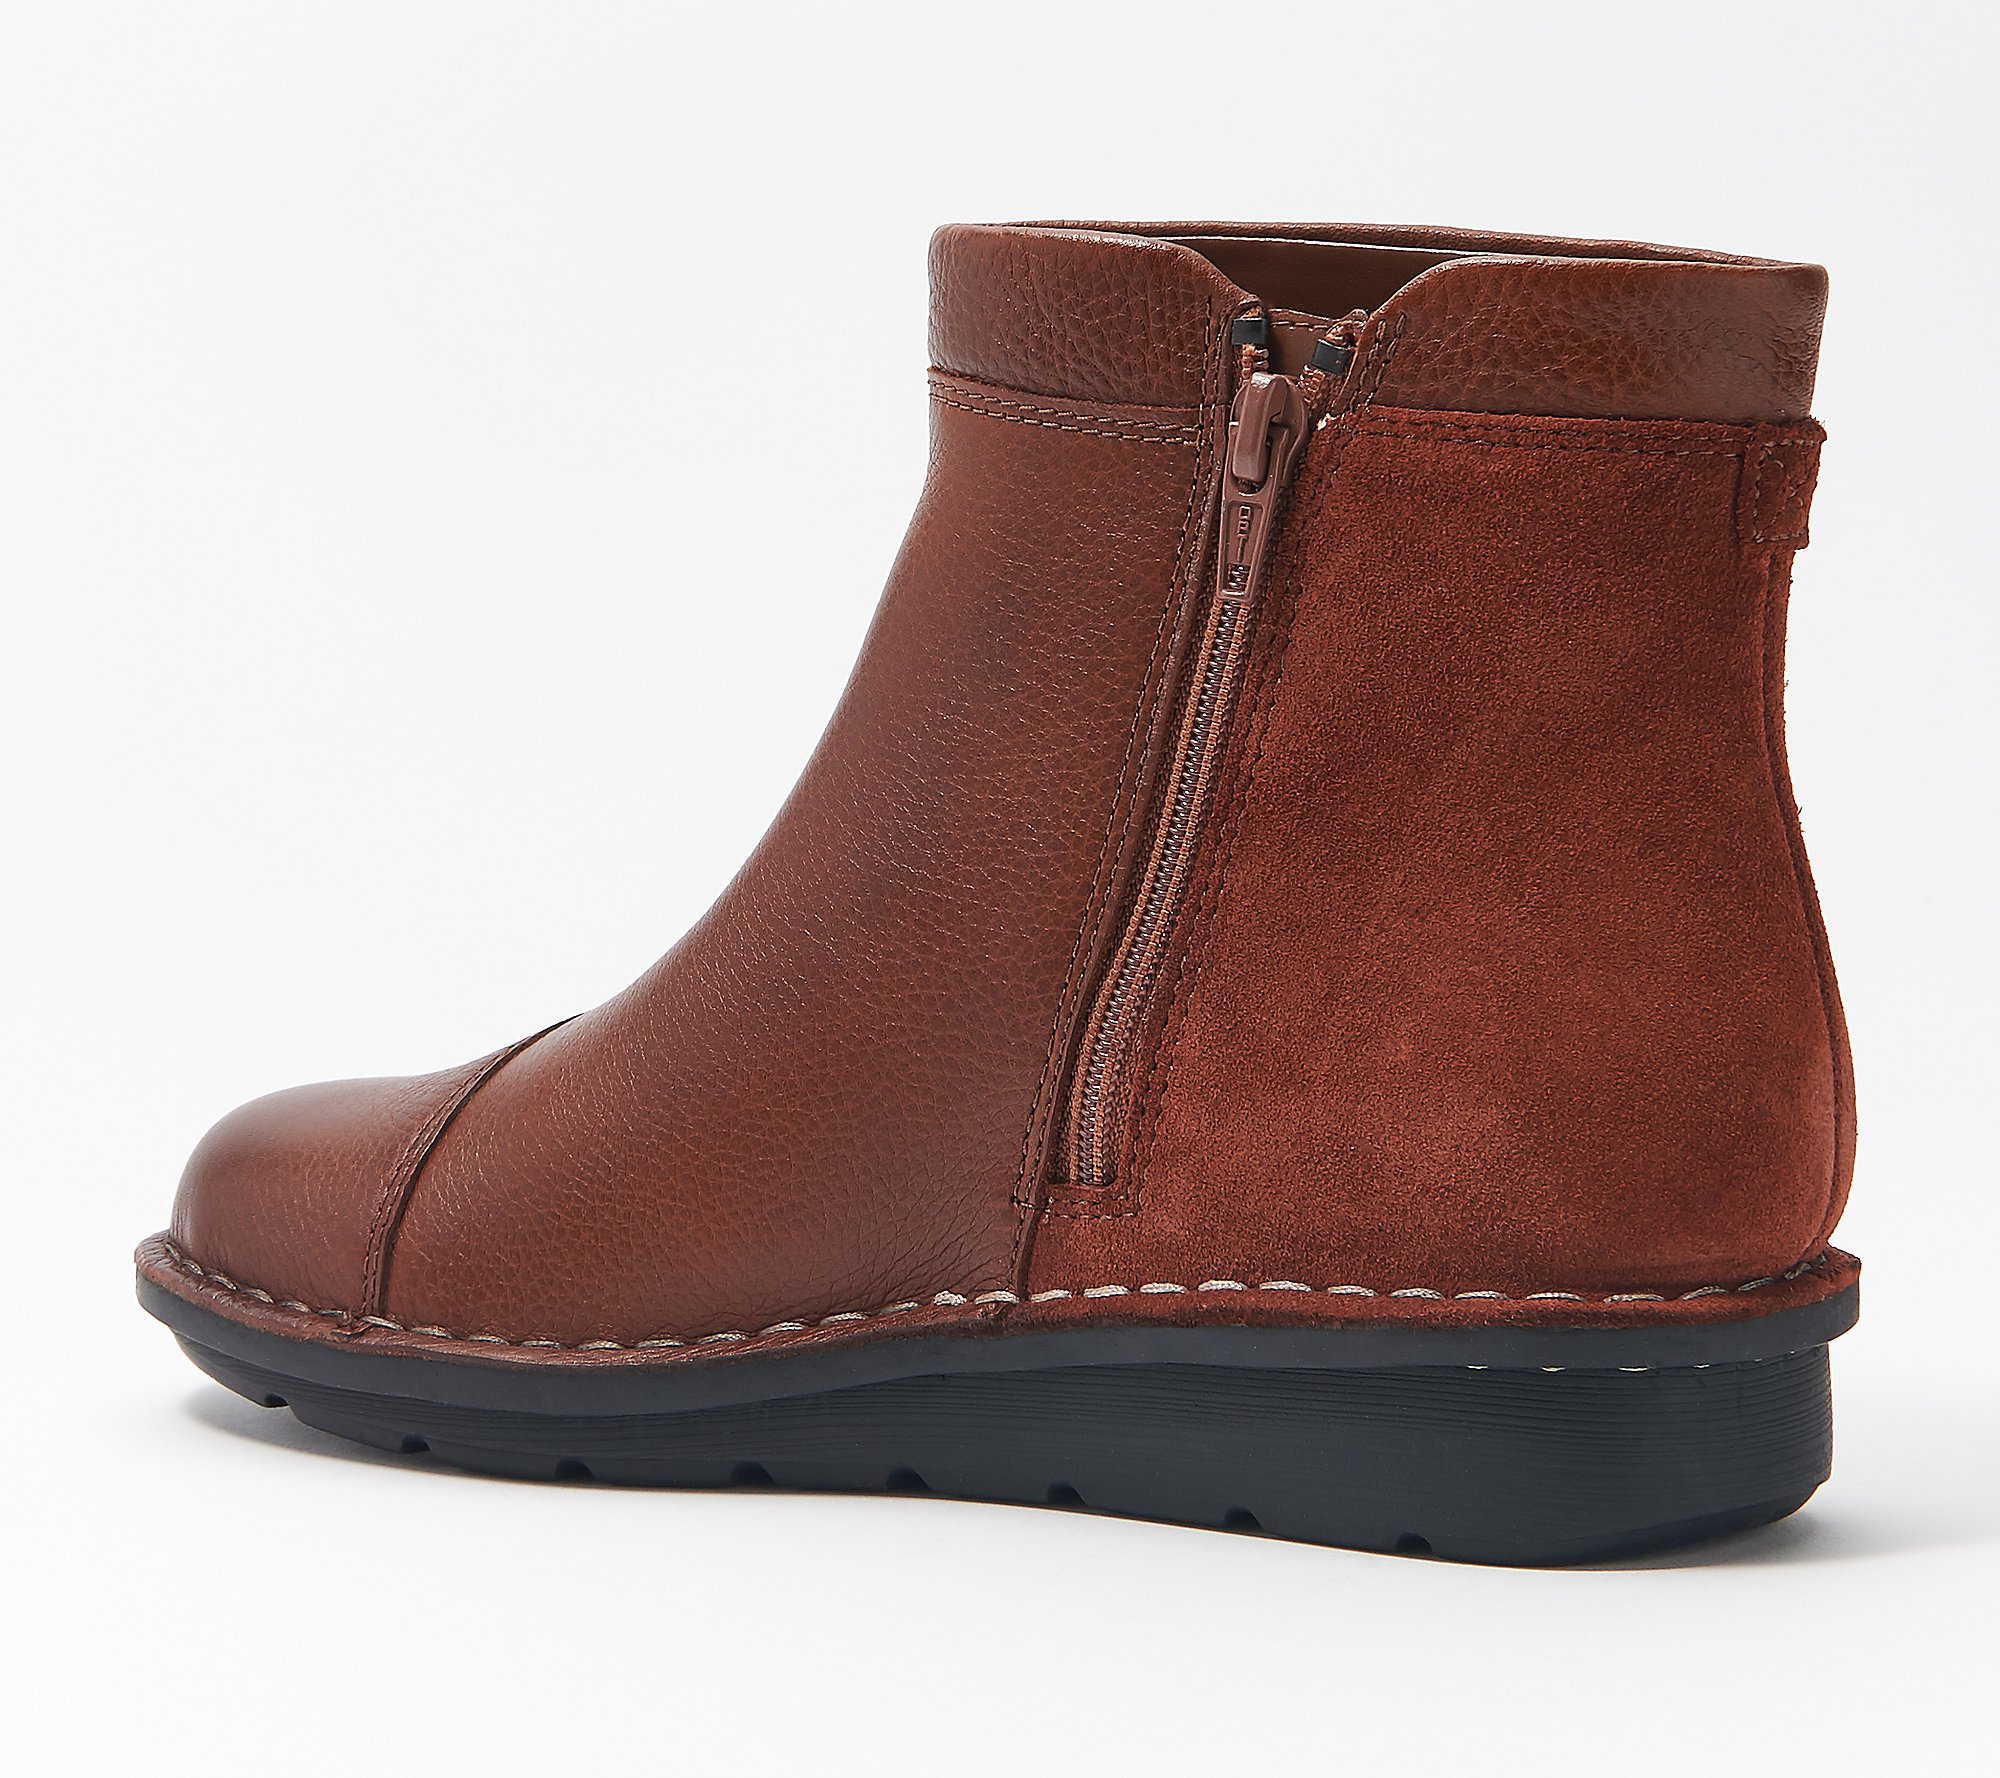 Boys Clarks Casual Zip Up Rounded Toe Leather Ankle Boots 'Cloud Air' 